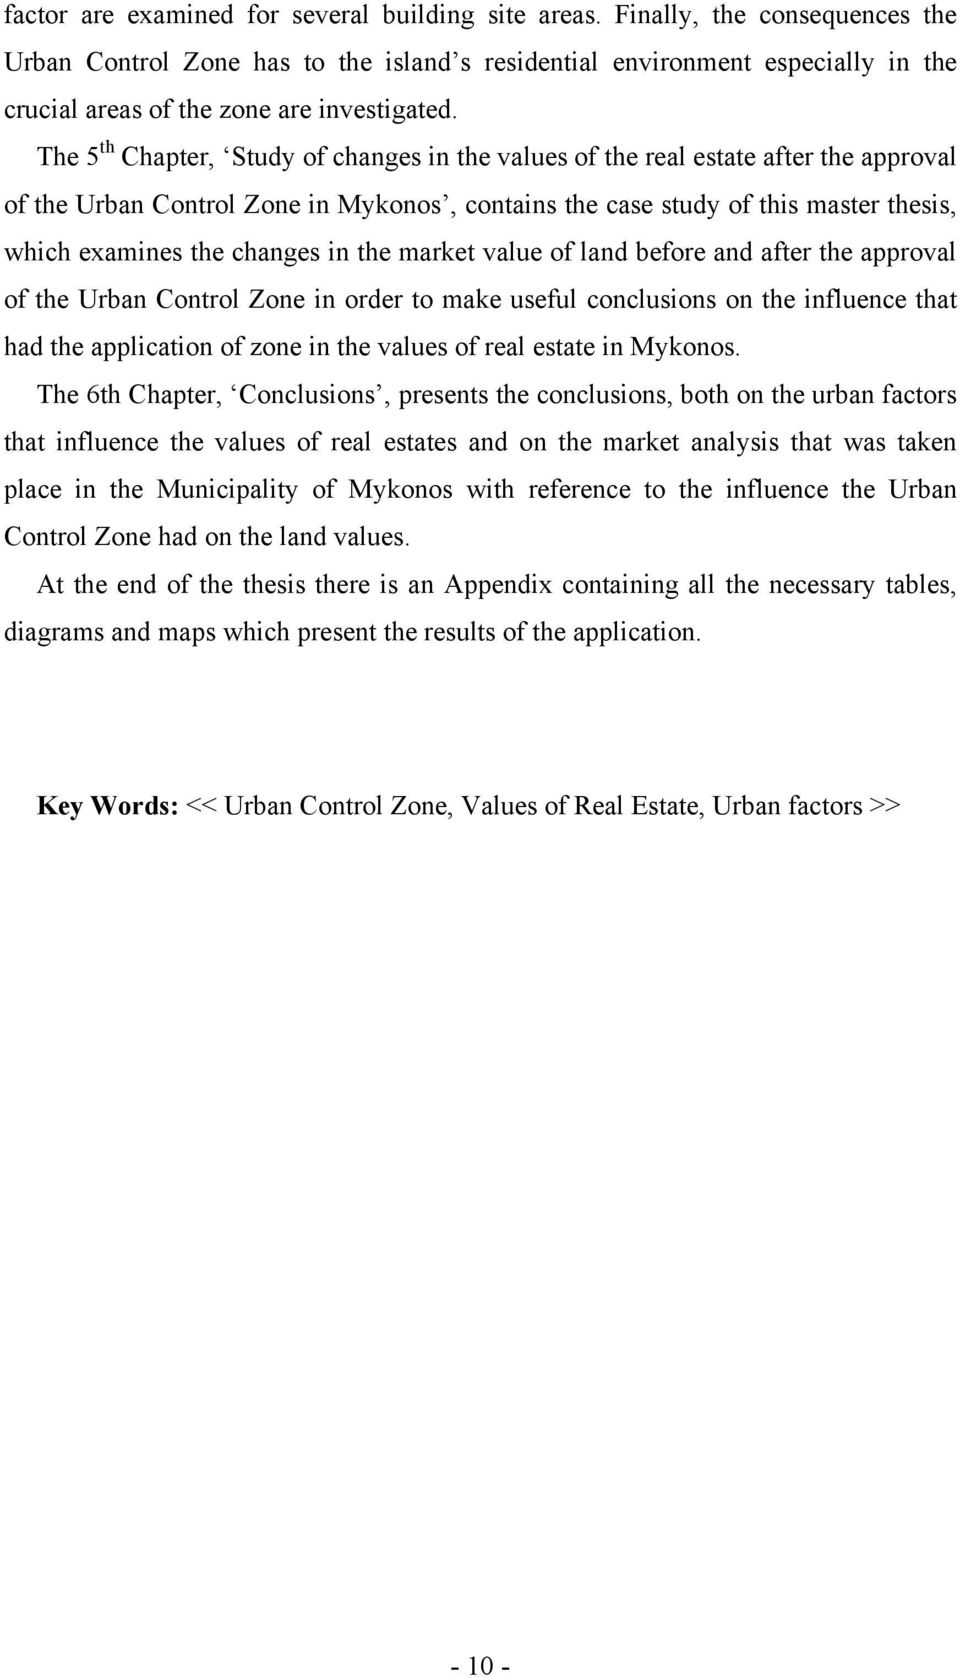 The 5 th Chapter, Study of changes in the values of the real estate after the approval of the Urban Control Zone in Mykonos, contains the case study of this master thesis, which examines the changes